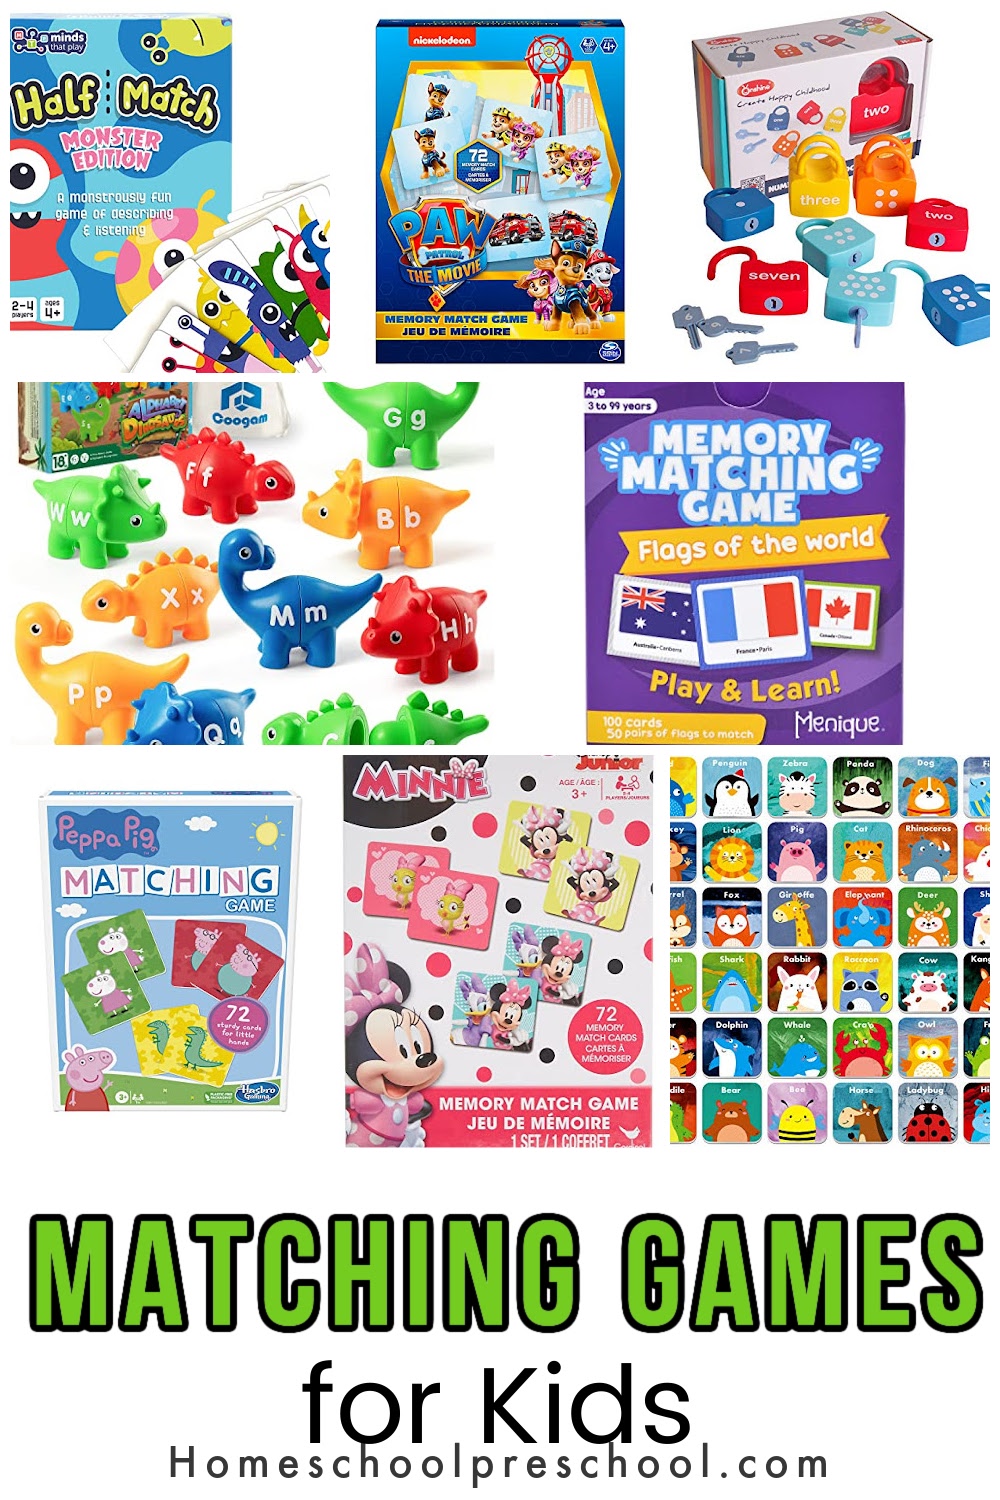 matching-games-1 Matching Games for Kids